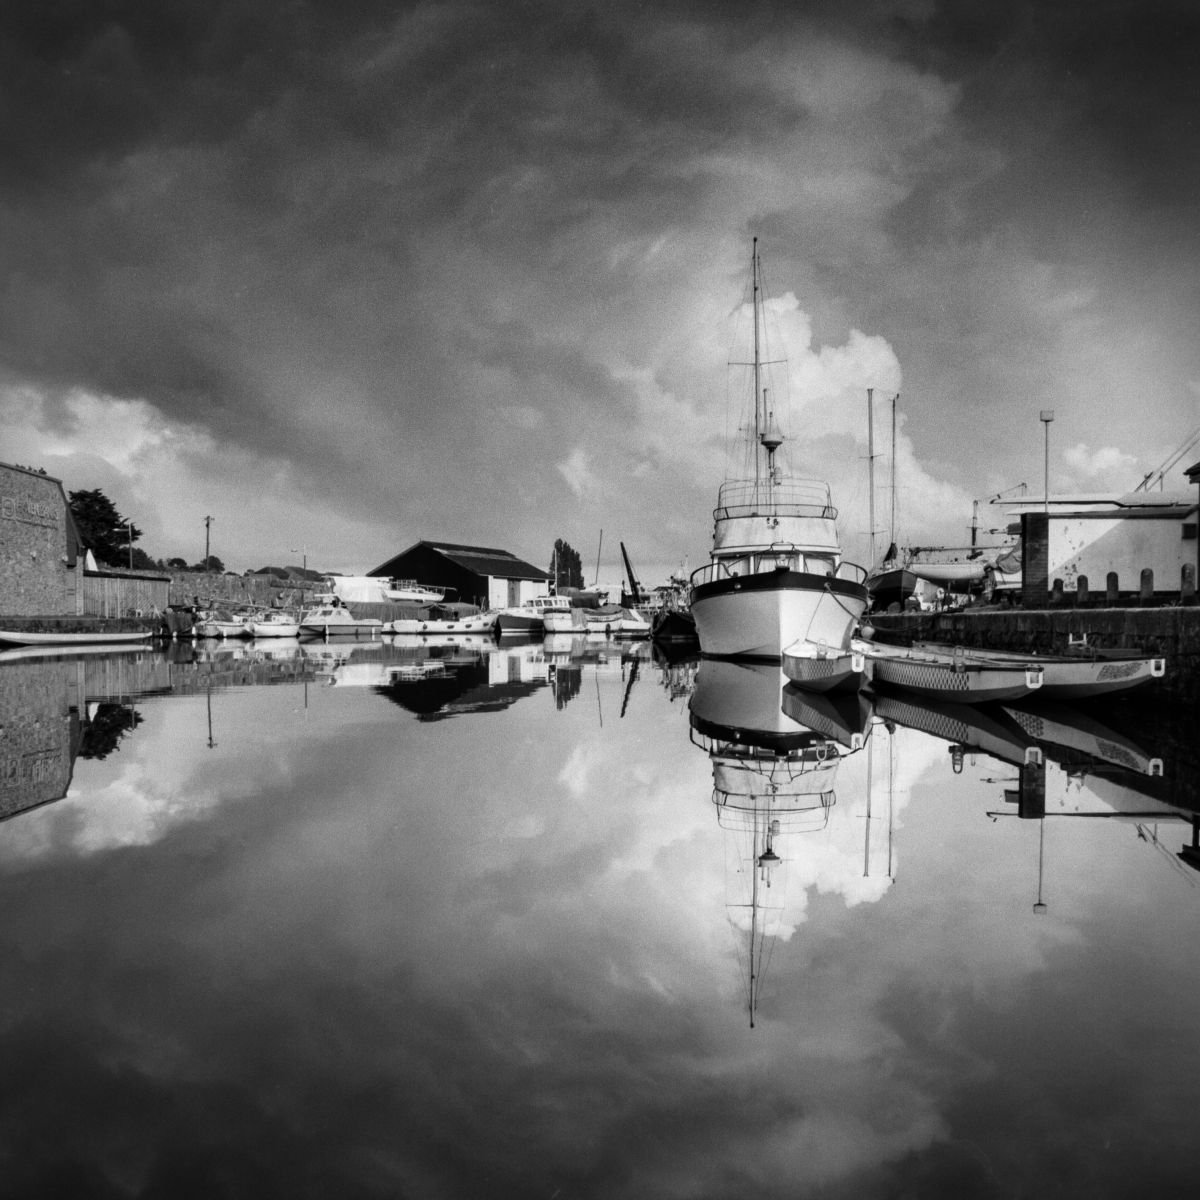 Boat Reflections #3 by John Rochester